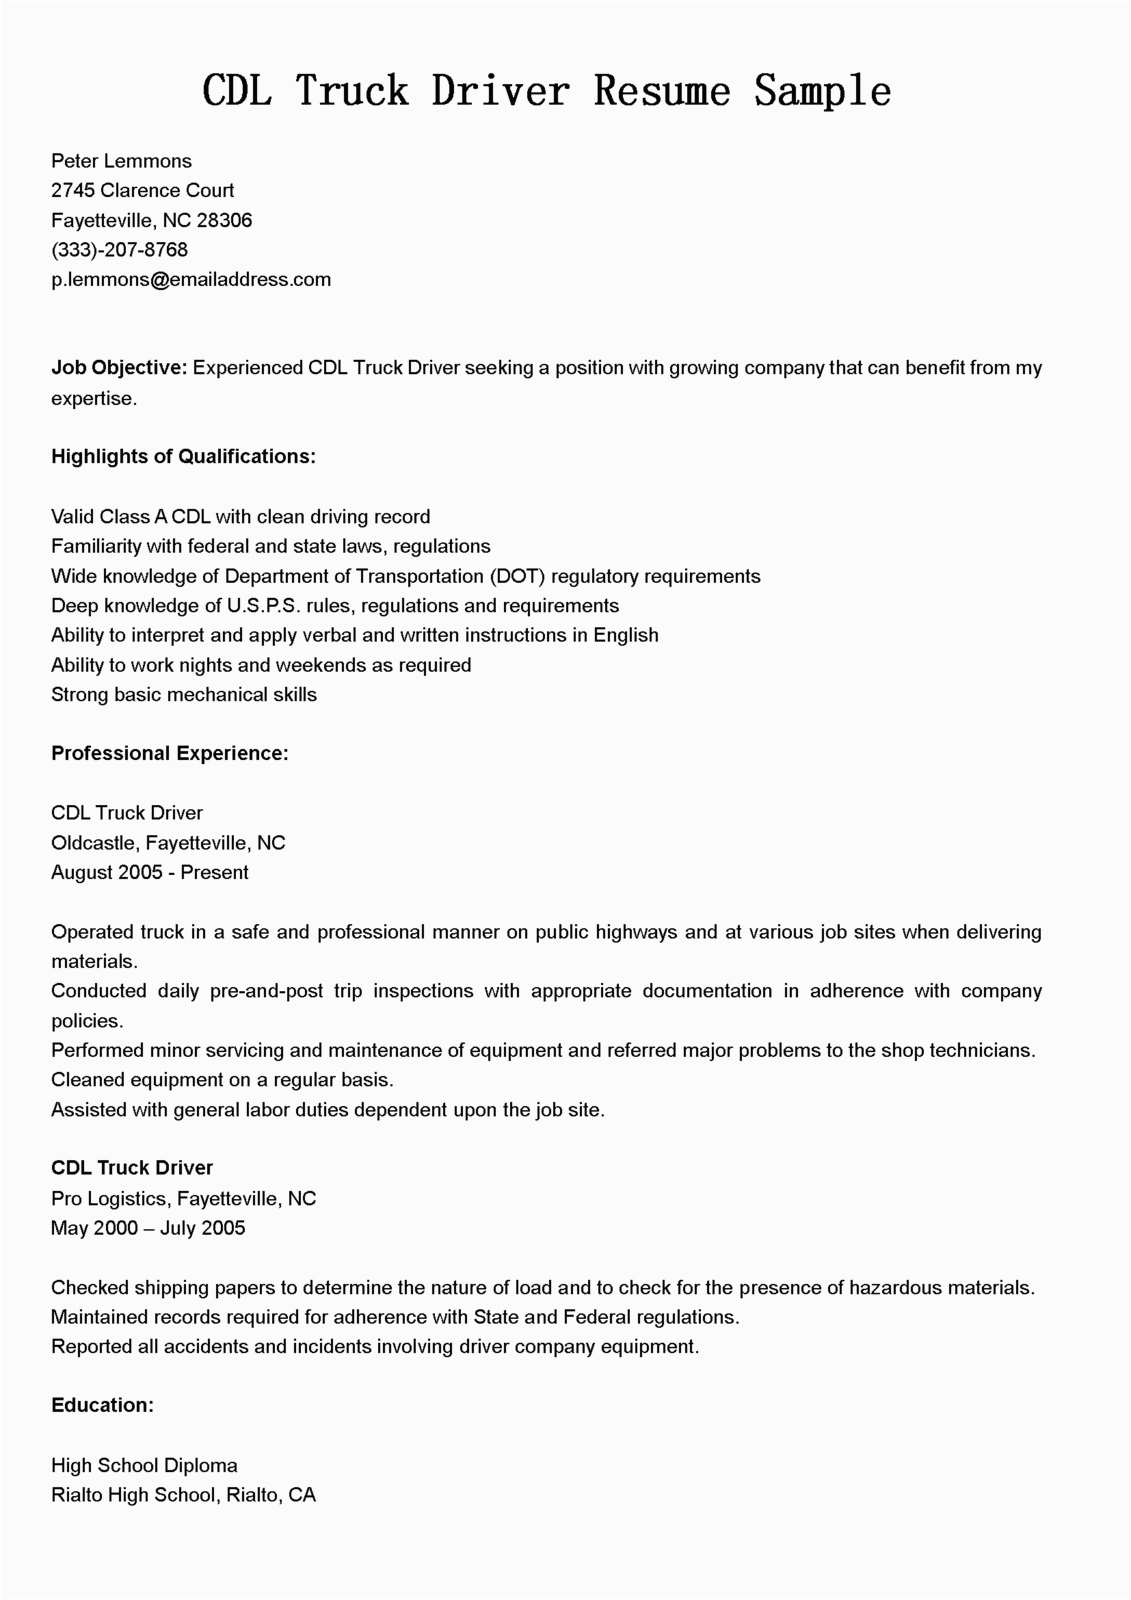 Cdl Class A Truck Driver Resume Sample Driver Resumes Cdl Truck Driver Resume Sample